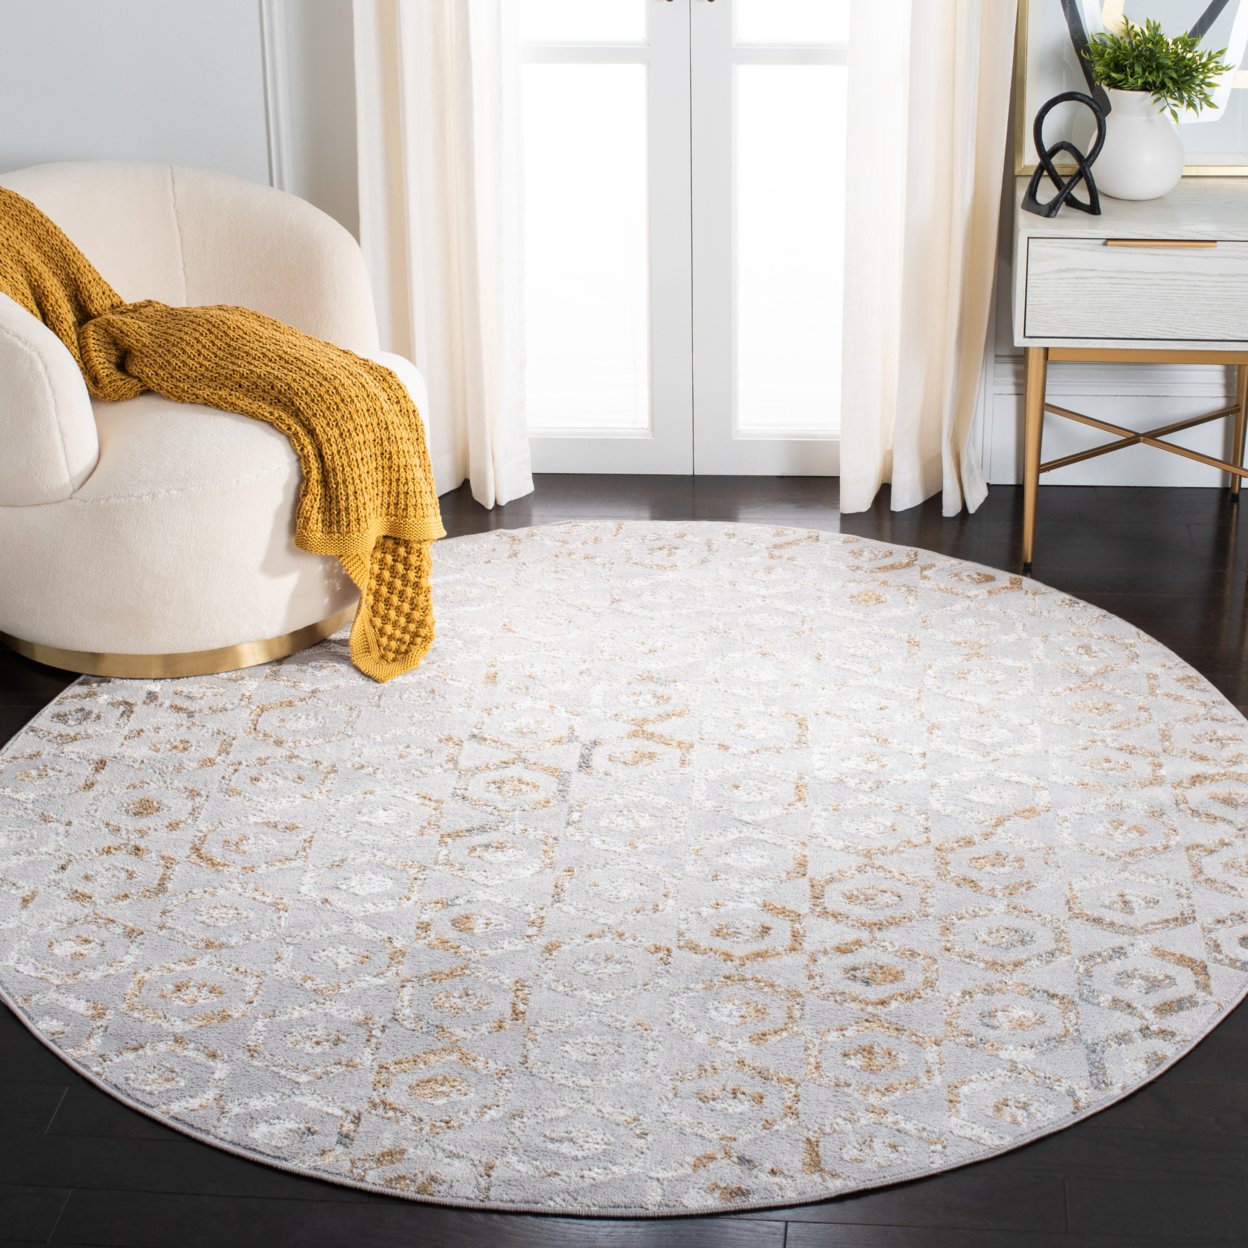 SAFAVIEH Orchard Collection ORC608F Grey / Gold Rug - 6-7 X 6-7 Round